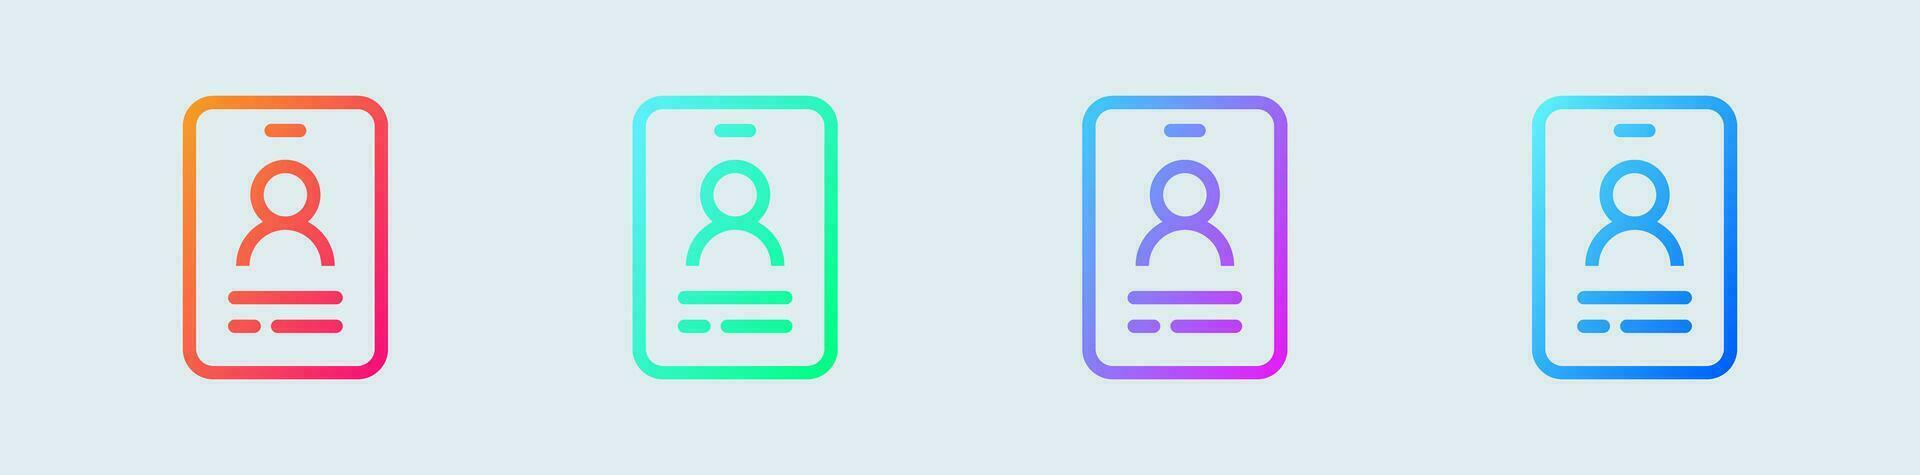 Identity line icon in gradient colors. User signs vector illustration.